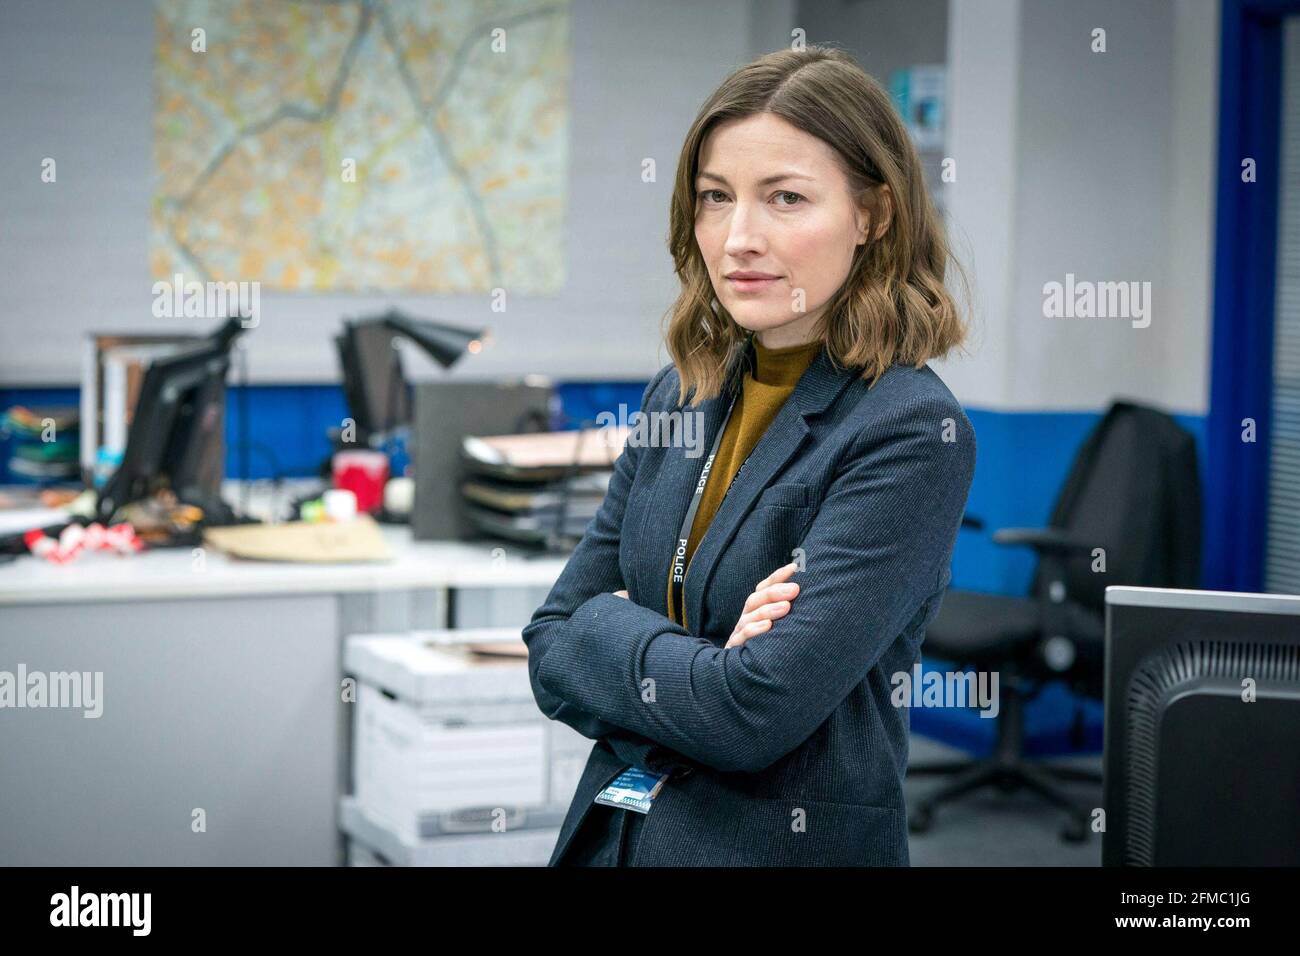 KELLY MACDONALD in LINE OF DUTY (2012), directed by JED MERCURIO. Credit: BBC DRAMA PRODUCTIONS / Album Stock Photo